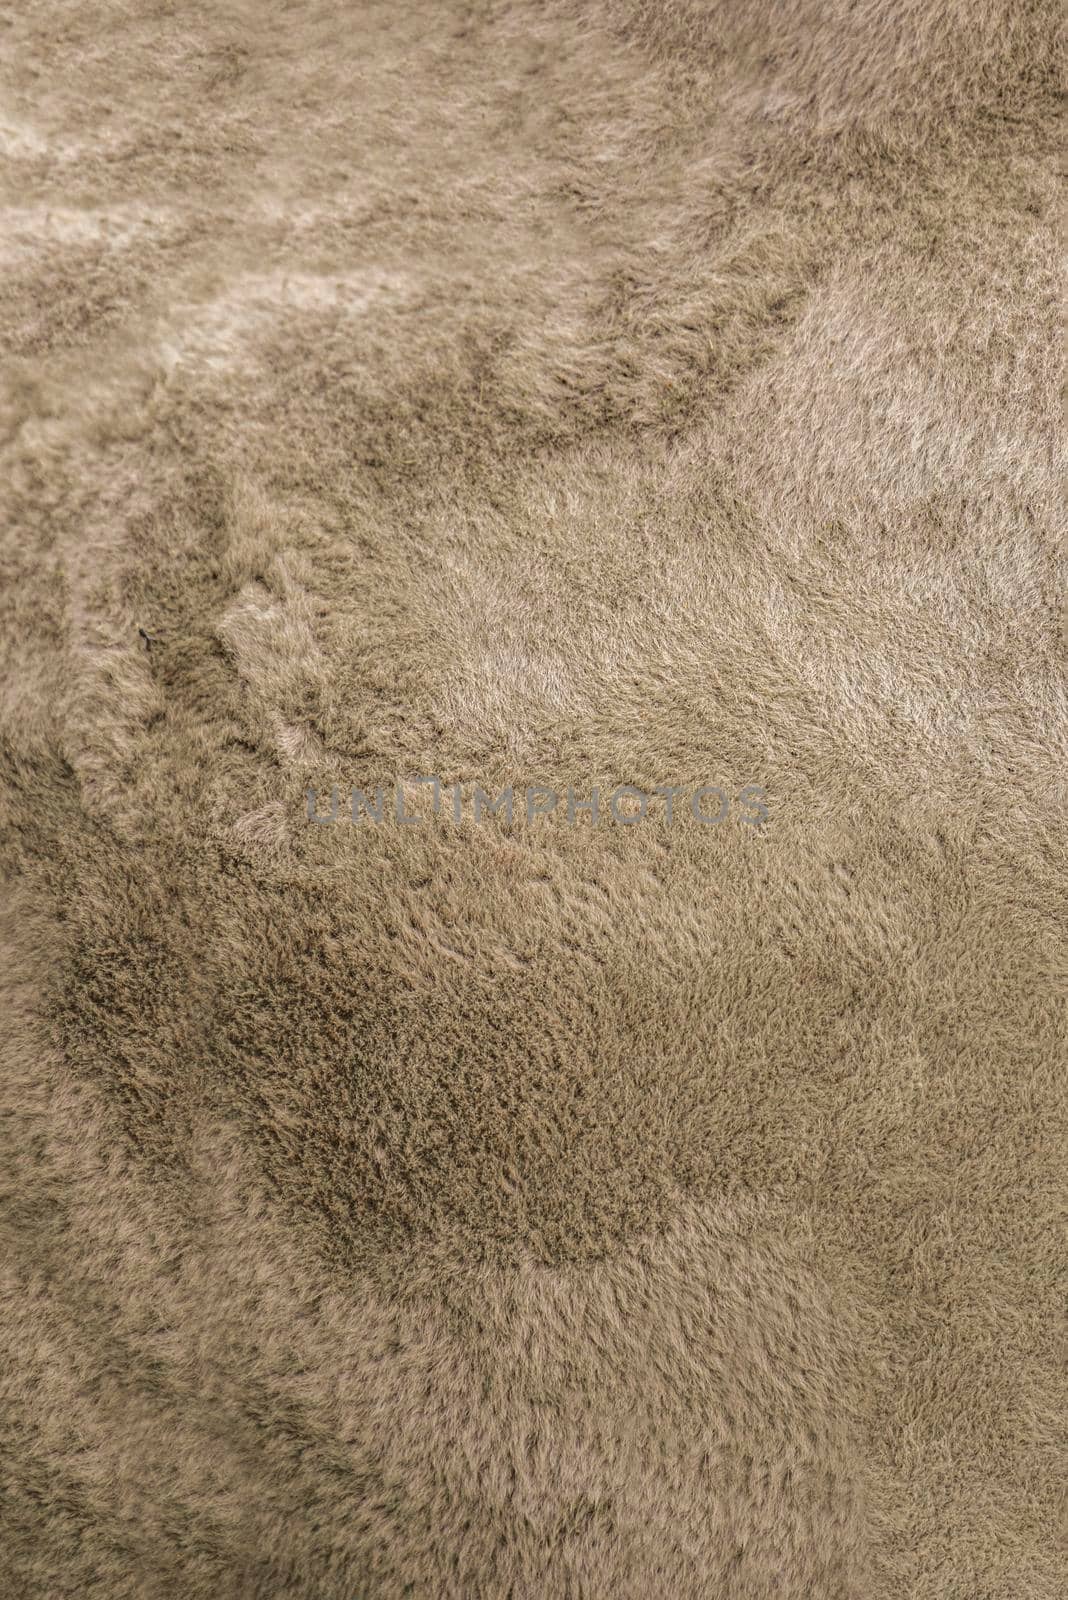 Camel texture. Camel skin close up. Camel wool for background or texture by SERSOL